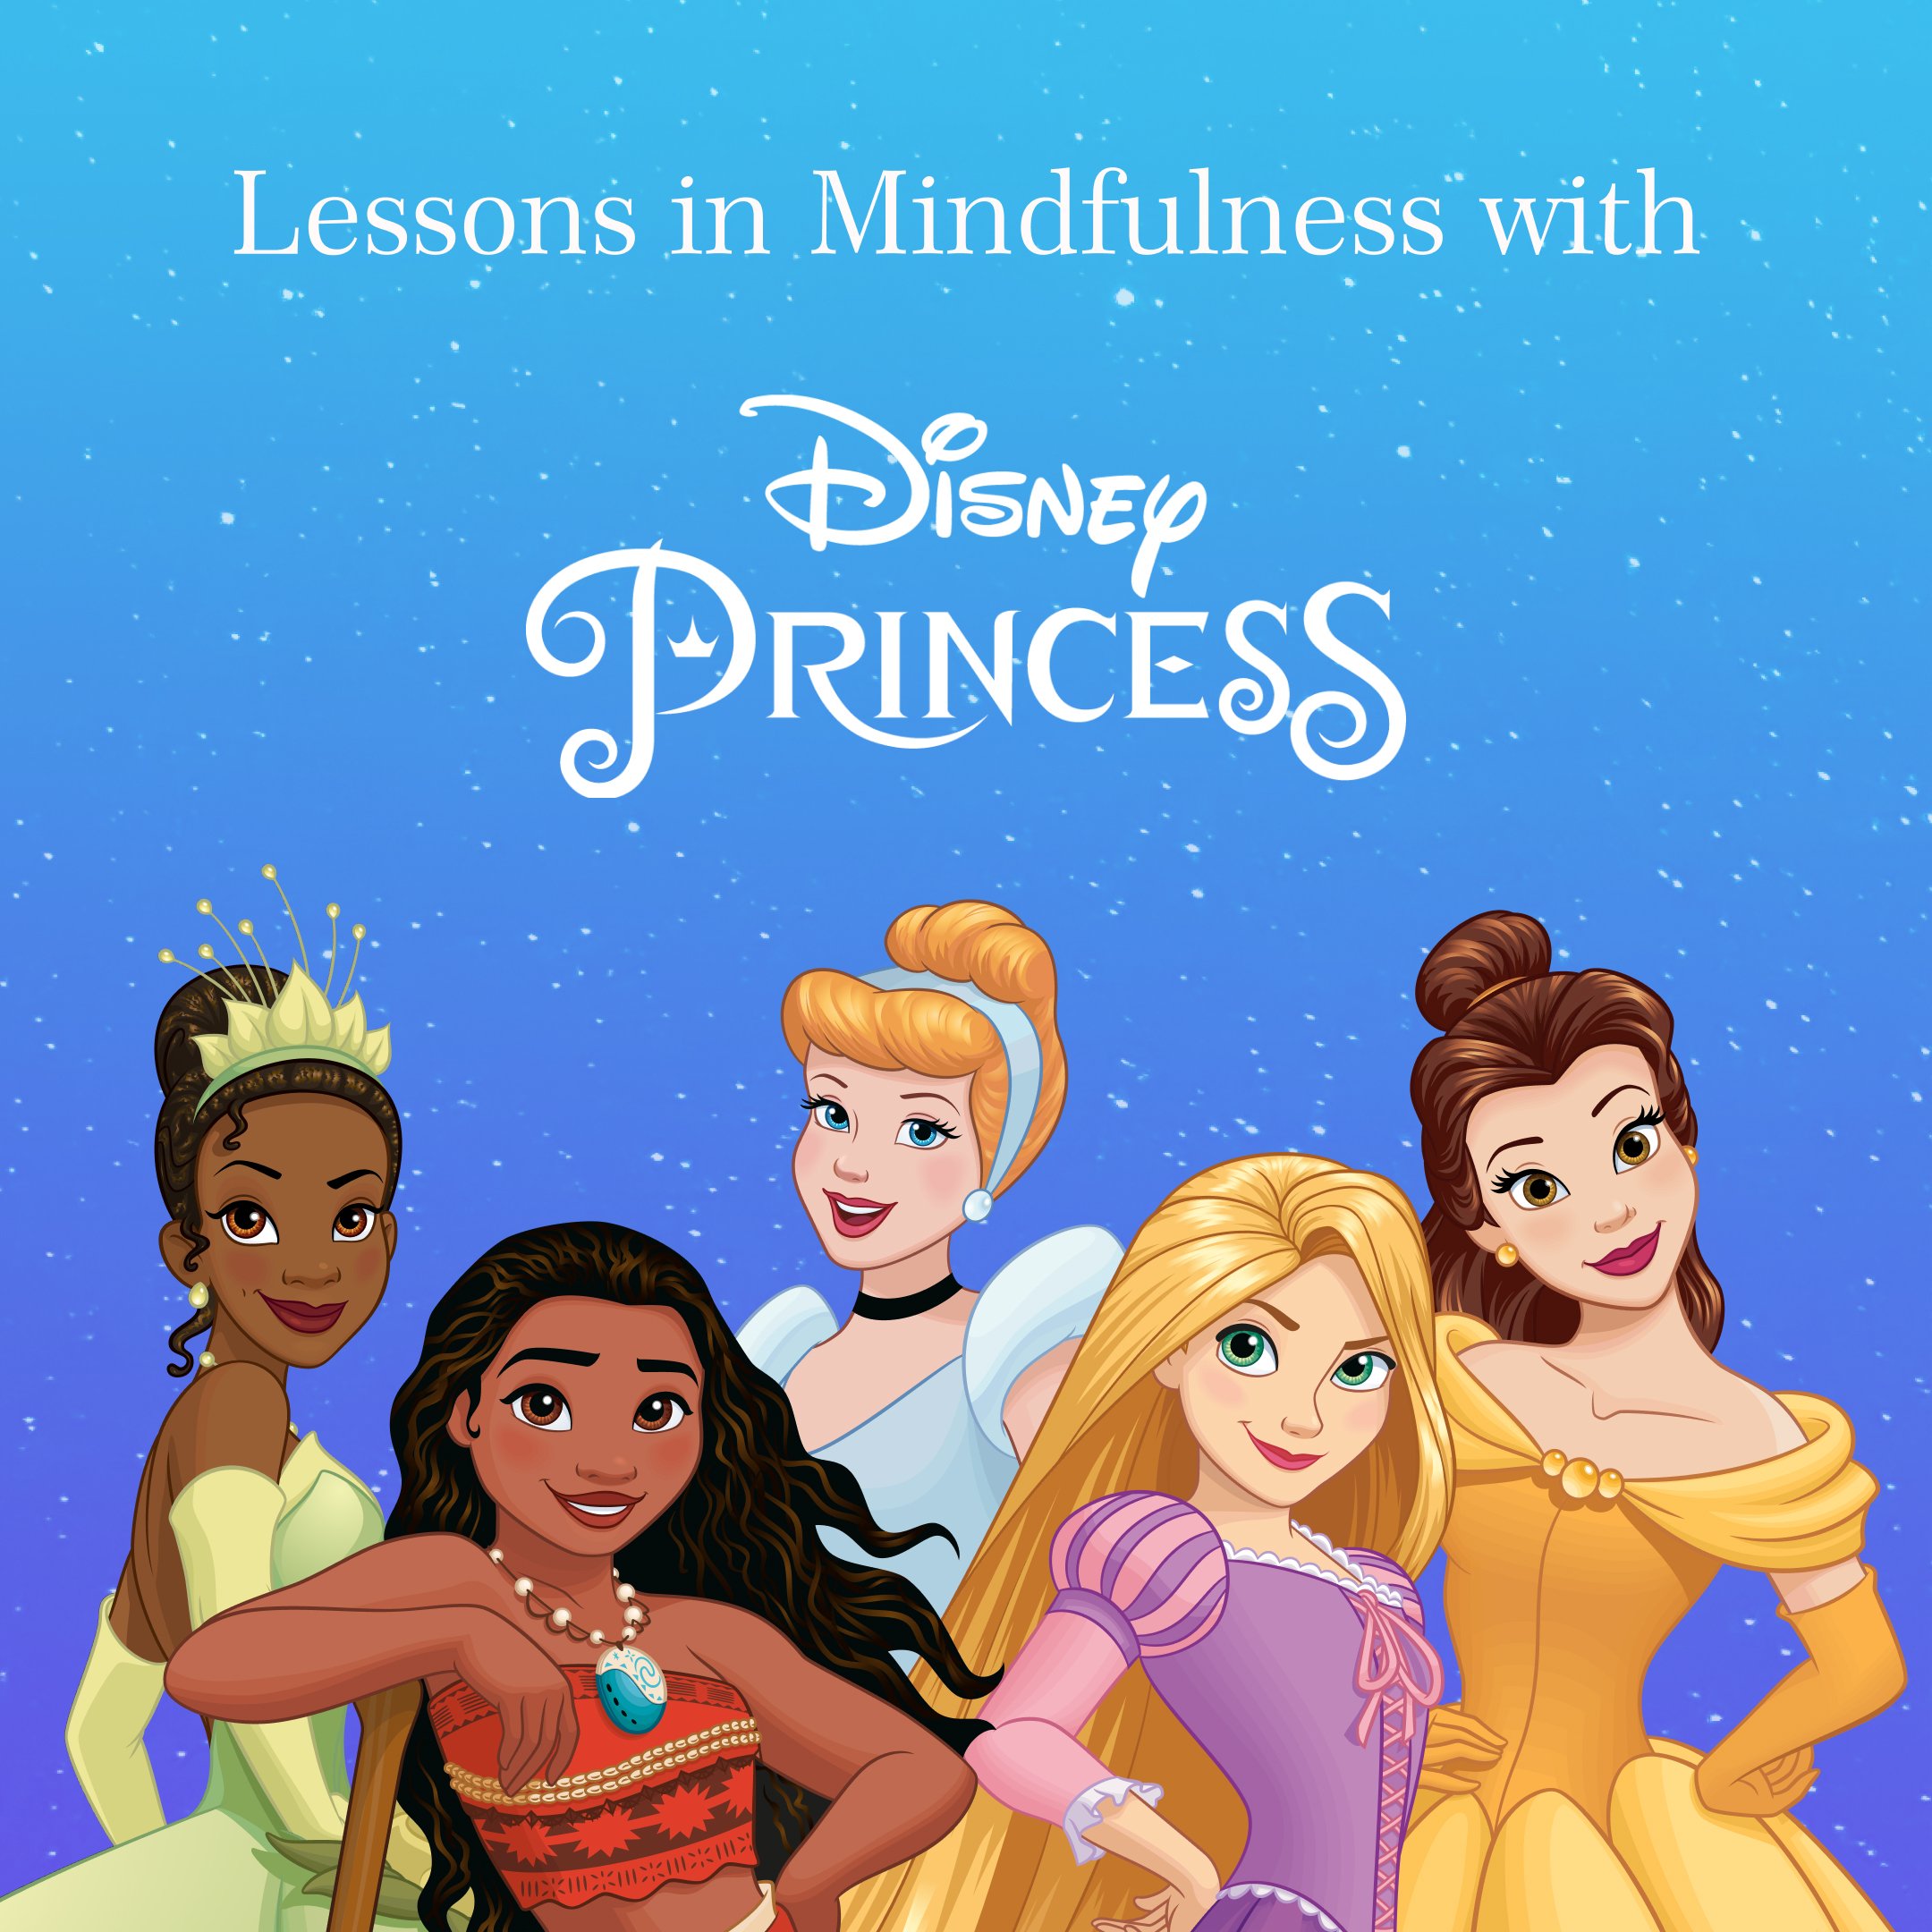 What Disney Princess characters can teach us about mindfulness